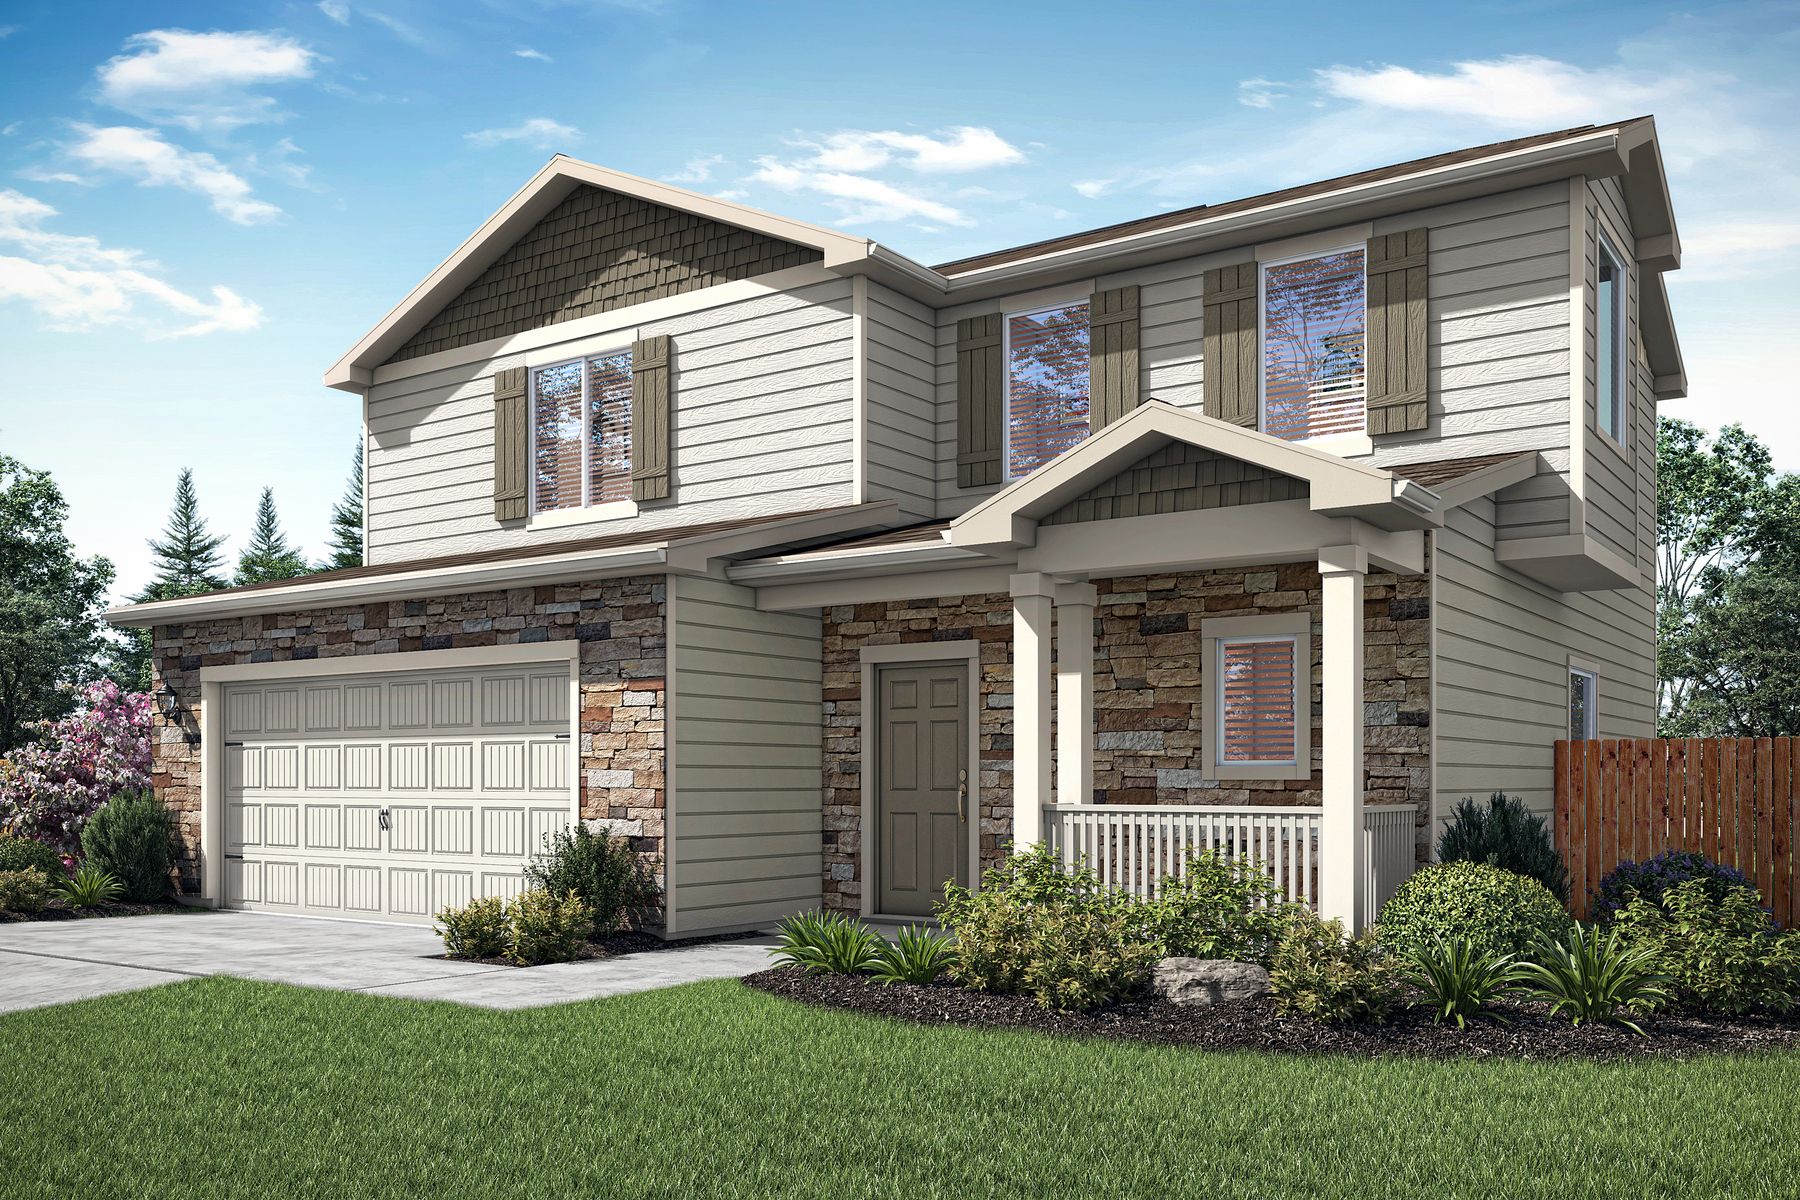 Rendering of the Mesa Verde at Pierson Park.:LGI Homes at Pierson Park